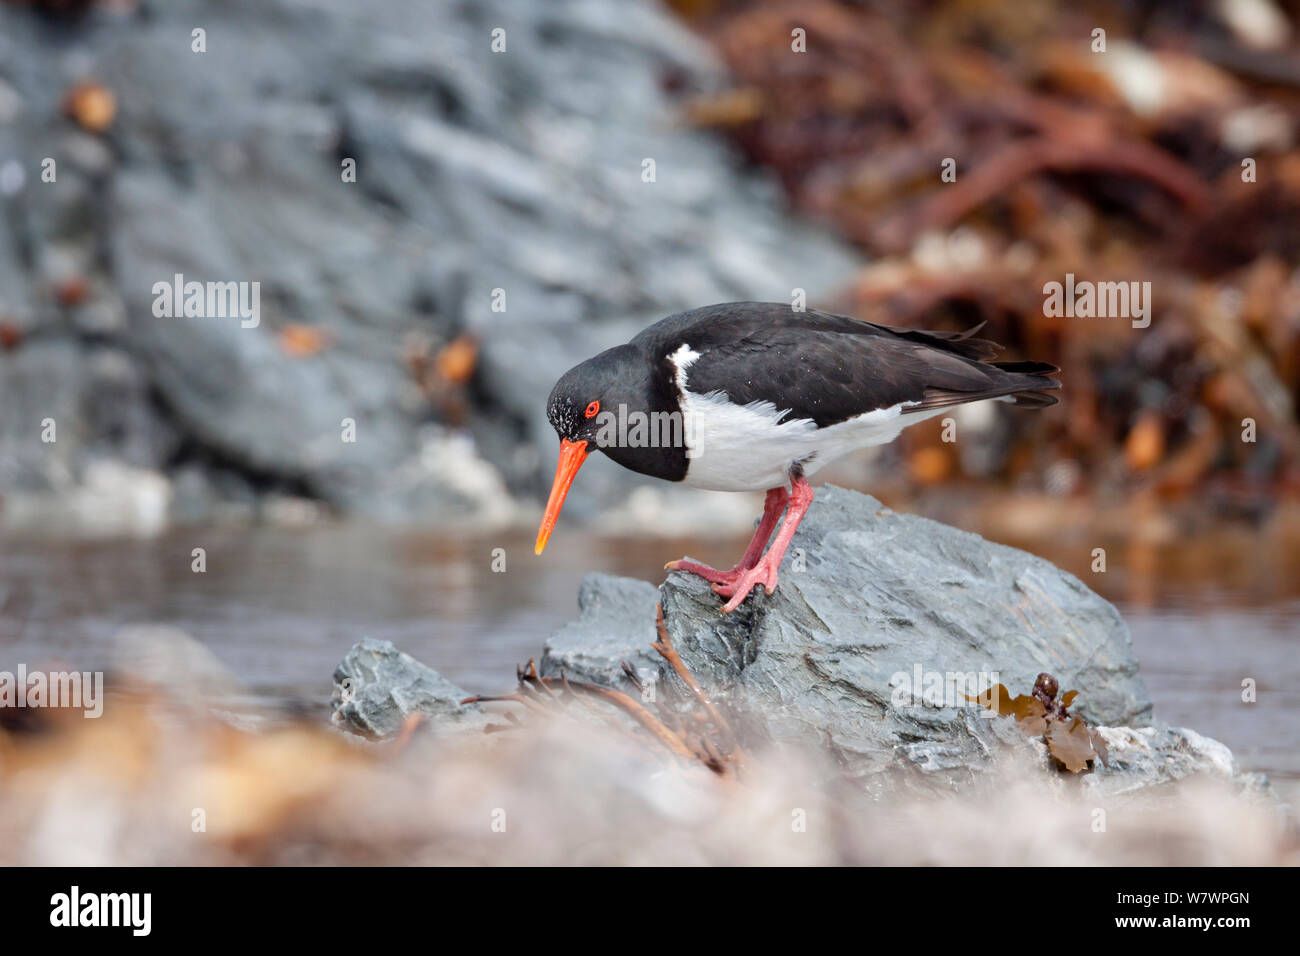 Chatham oystercatcher (Haematopus chathamensis) on a rocky shoreline. Maunganui Beach, Chatham Islands, New Zealand, December. Endangered species. Stock Photo